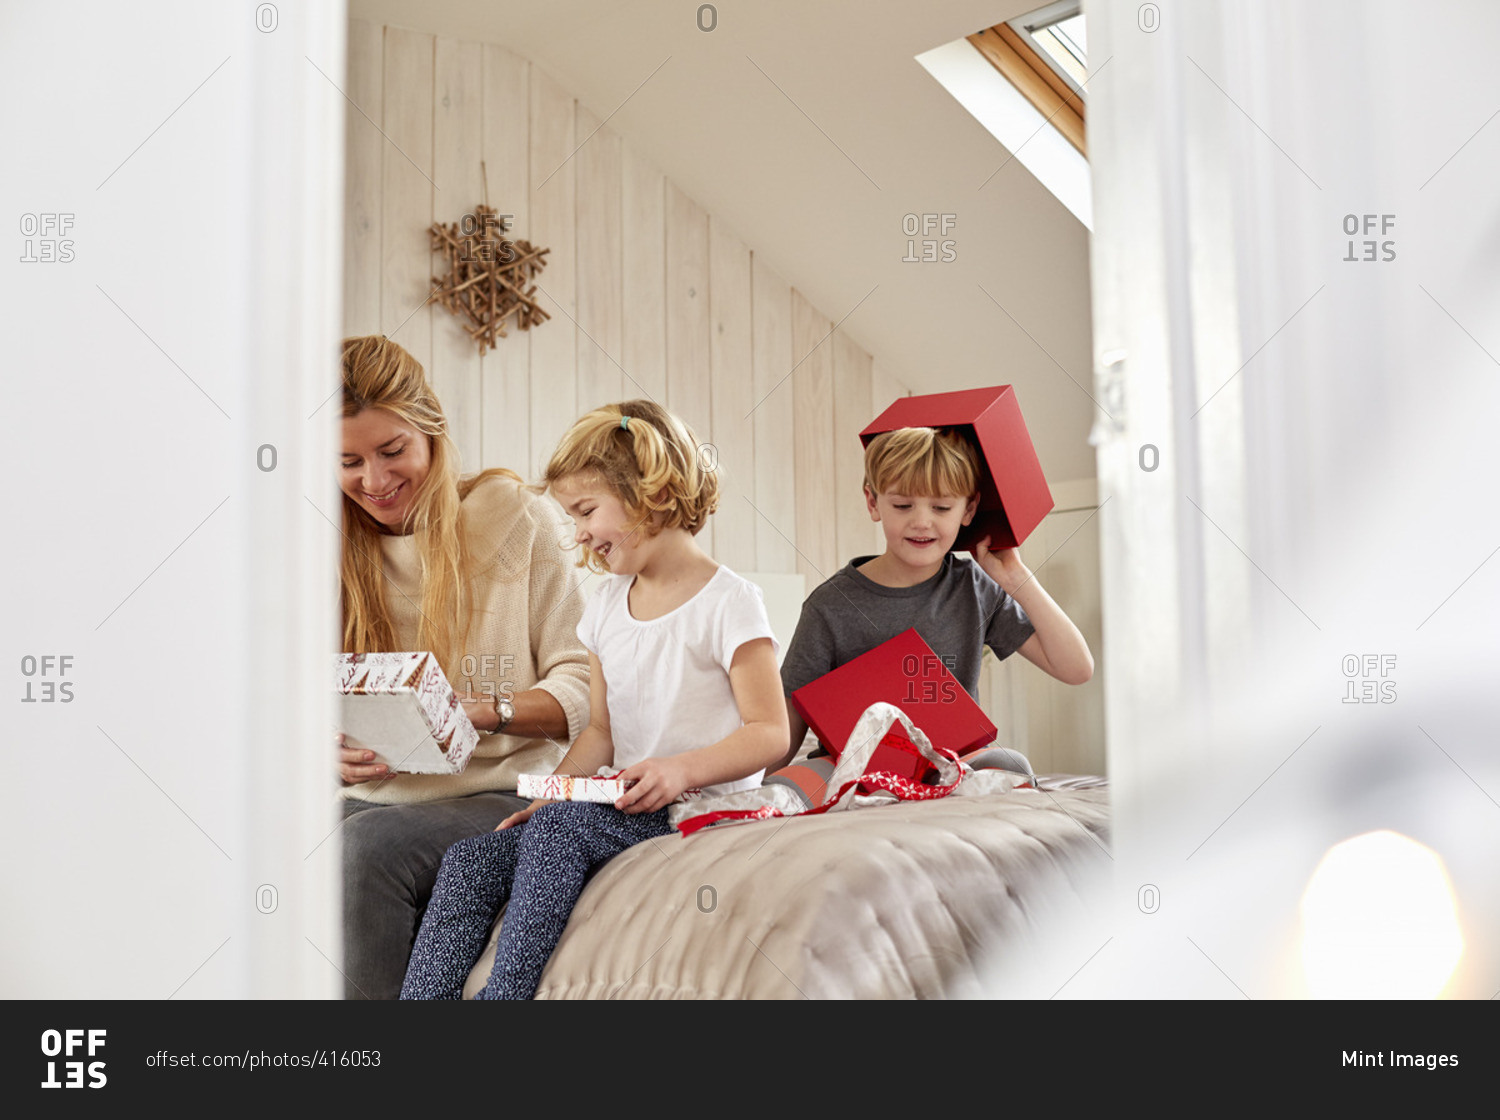 Christmas morning in a family home A mother and two children sitting on a bed opening presents